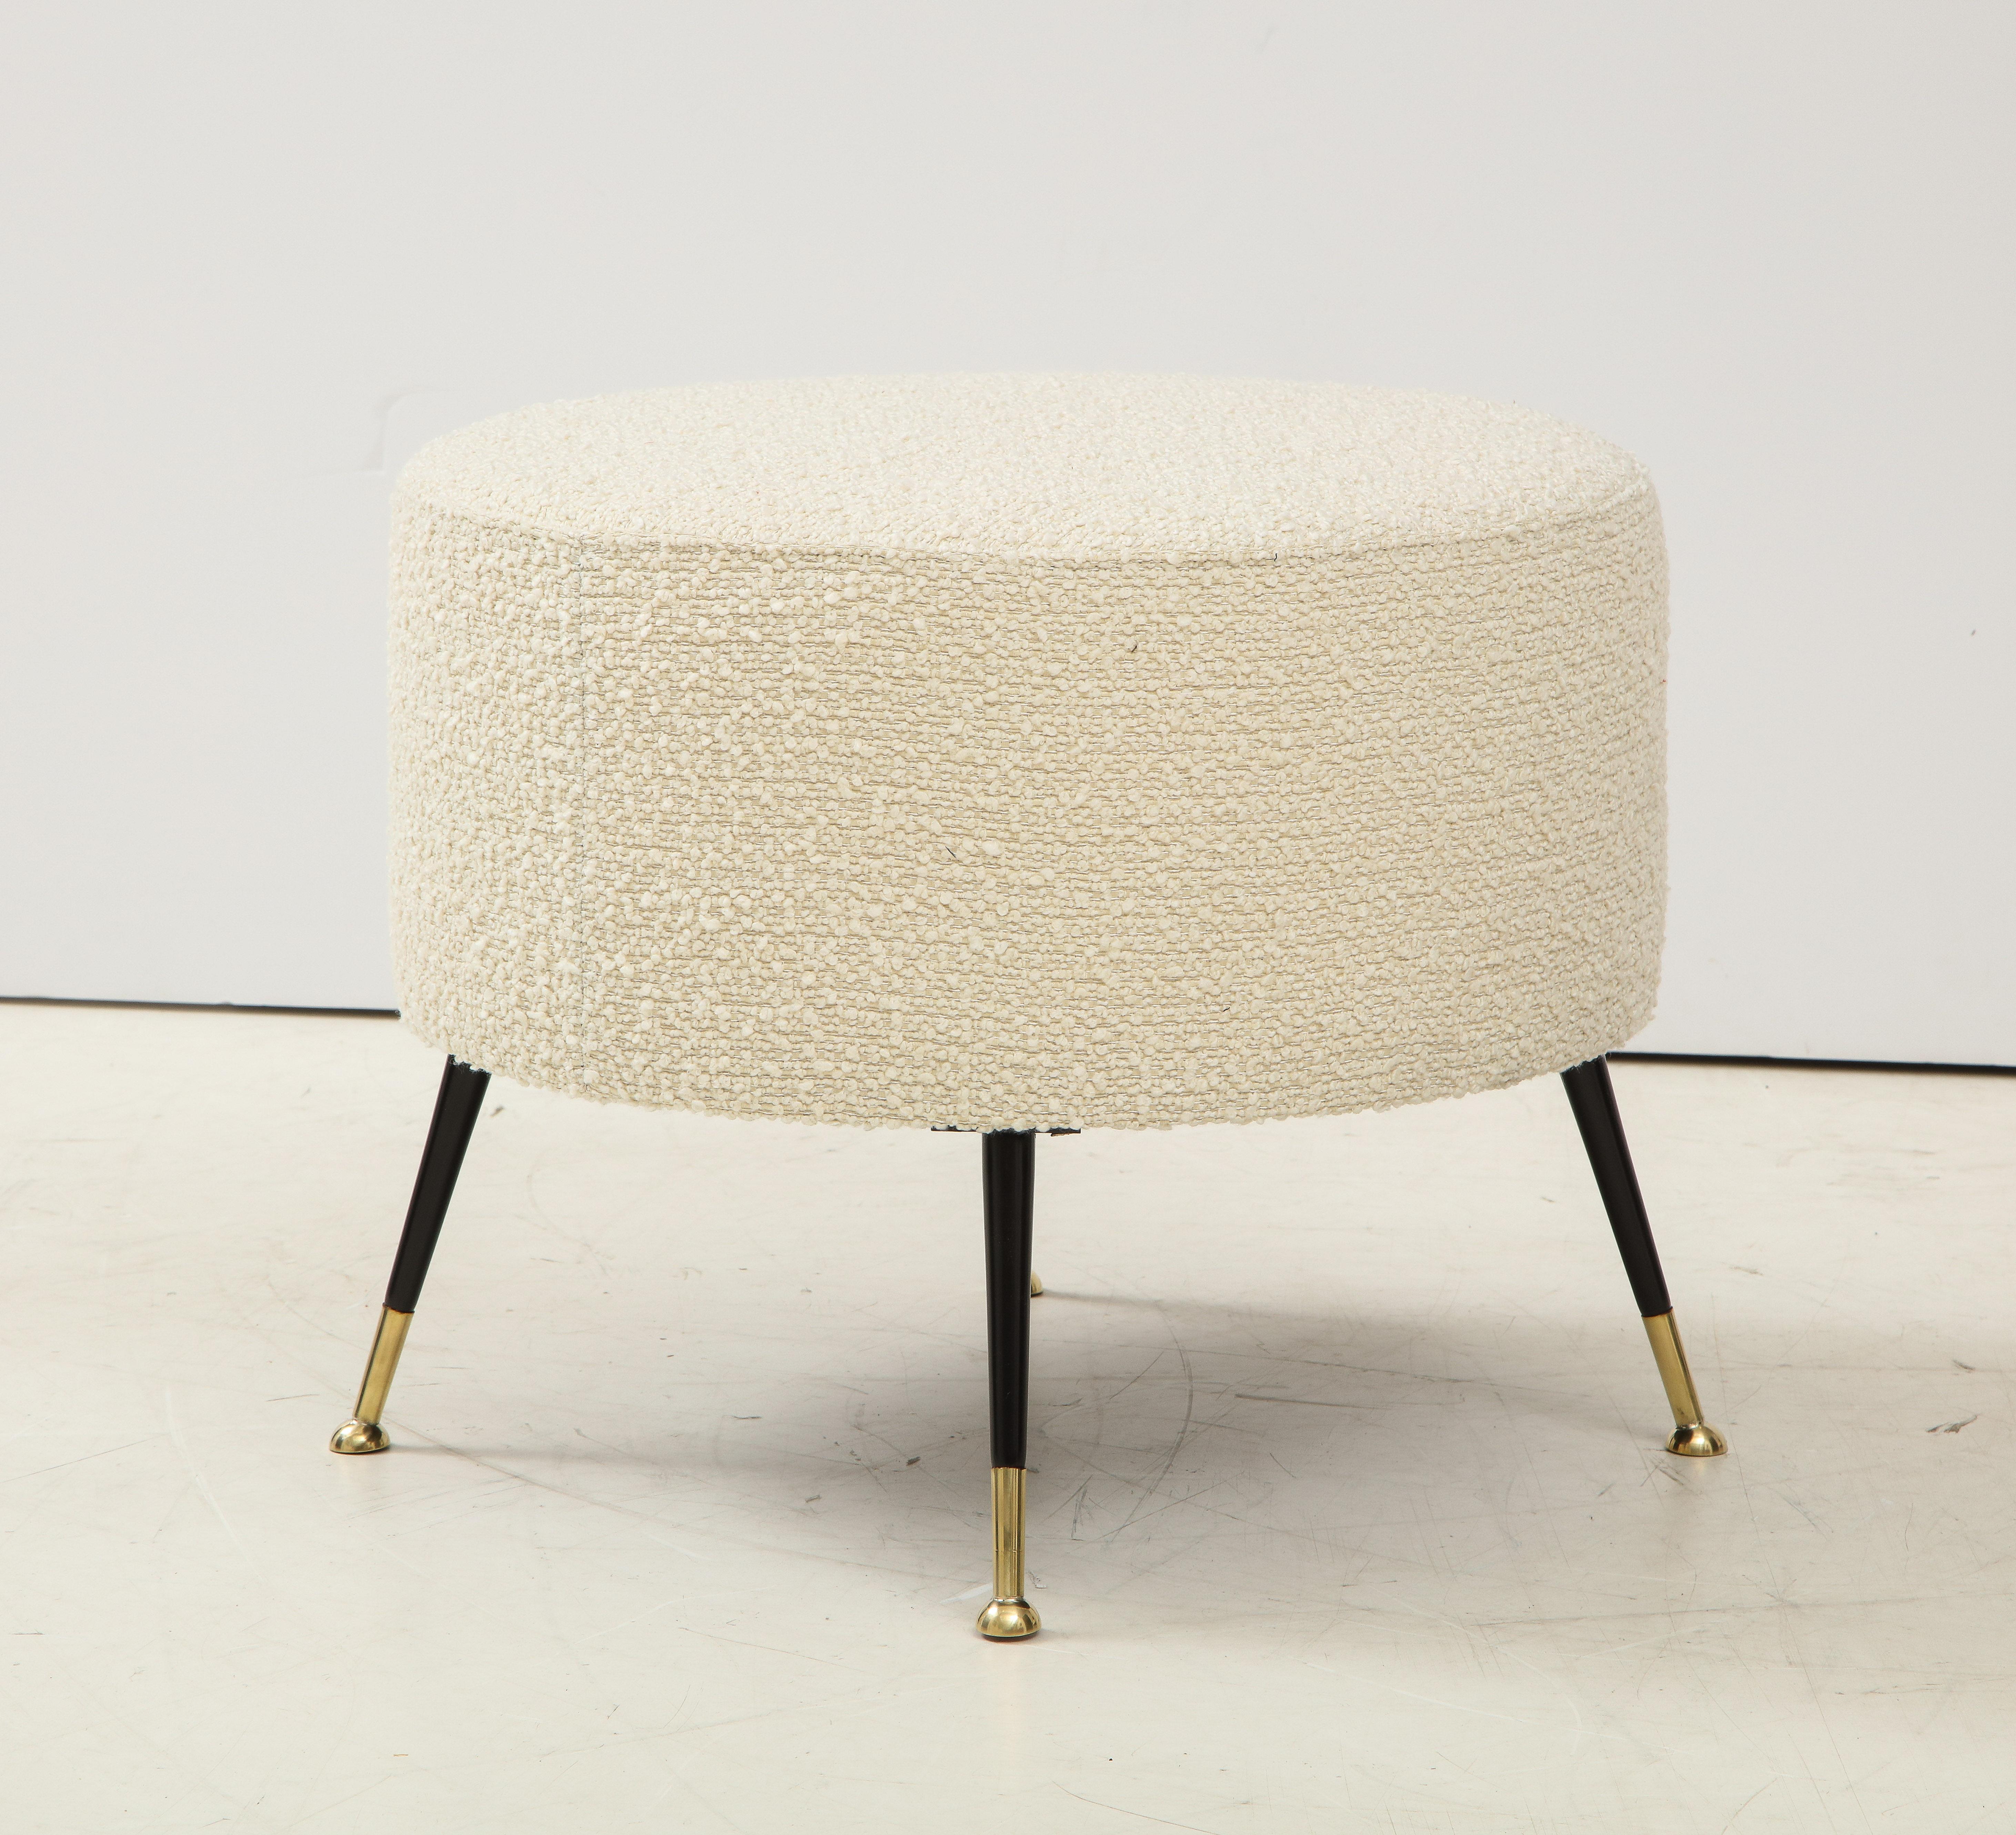 Bouclé Pair of Round Stools or Poufs in Ivory Boucle Brass Legs, Italy, 2021